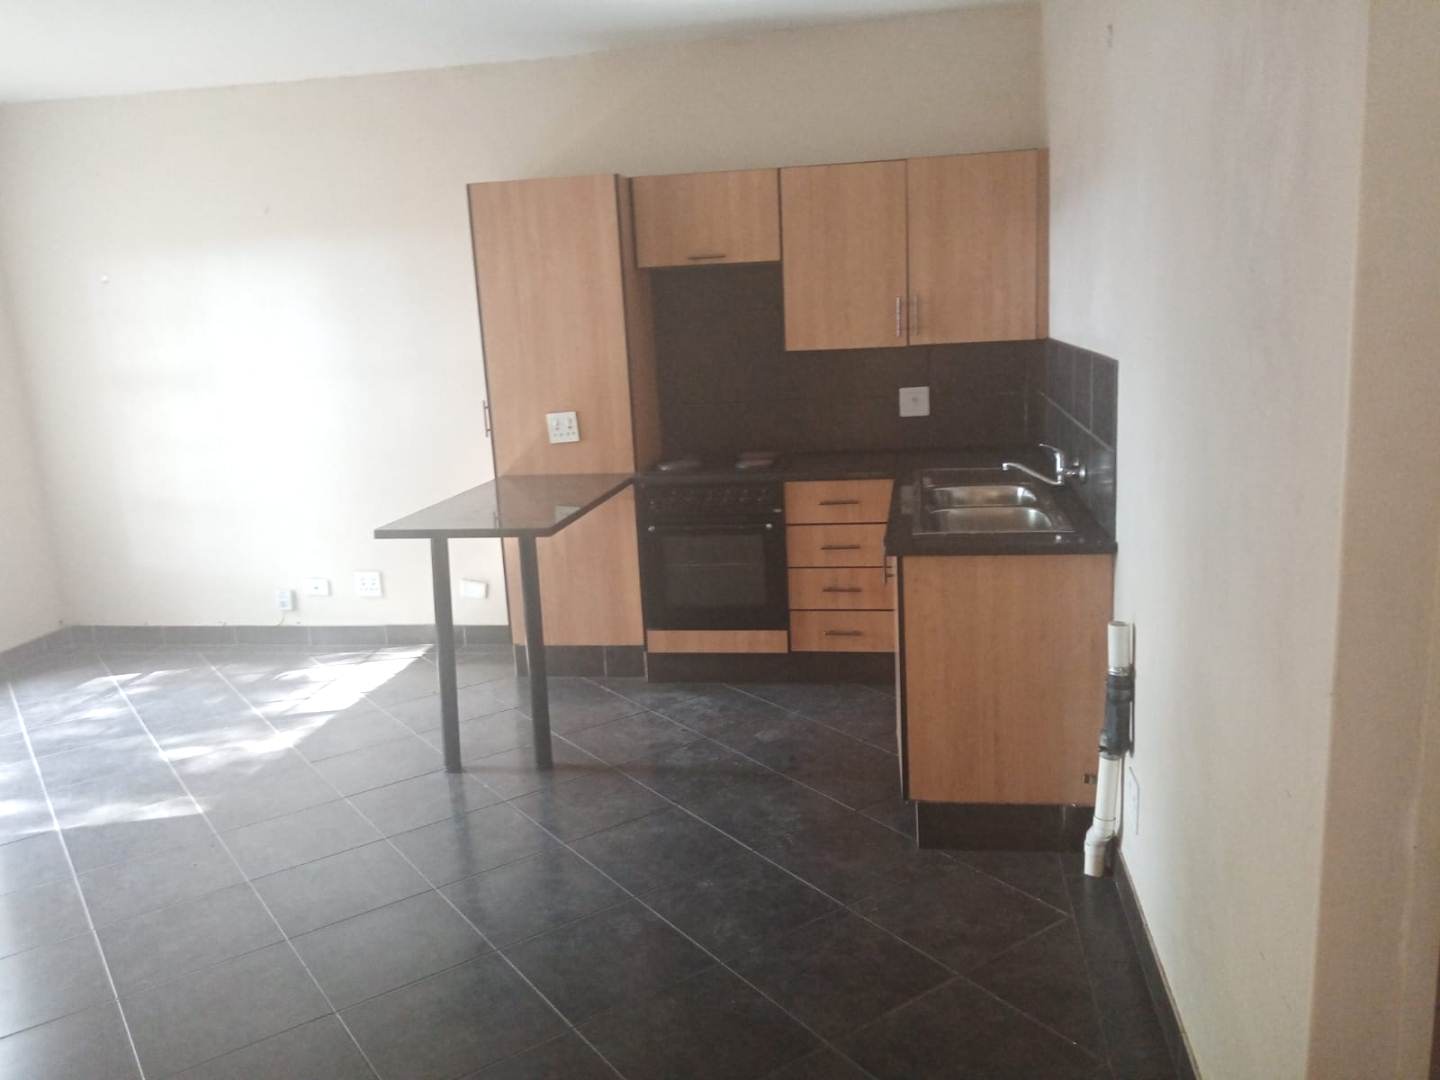 2 Bedroom Apartment / flat to rent in Witbank Ext 10 - P24-111483197